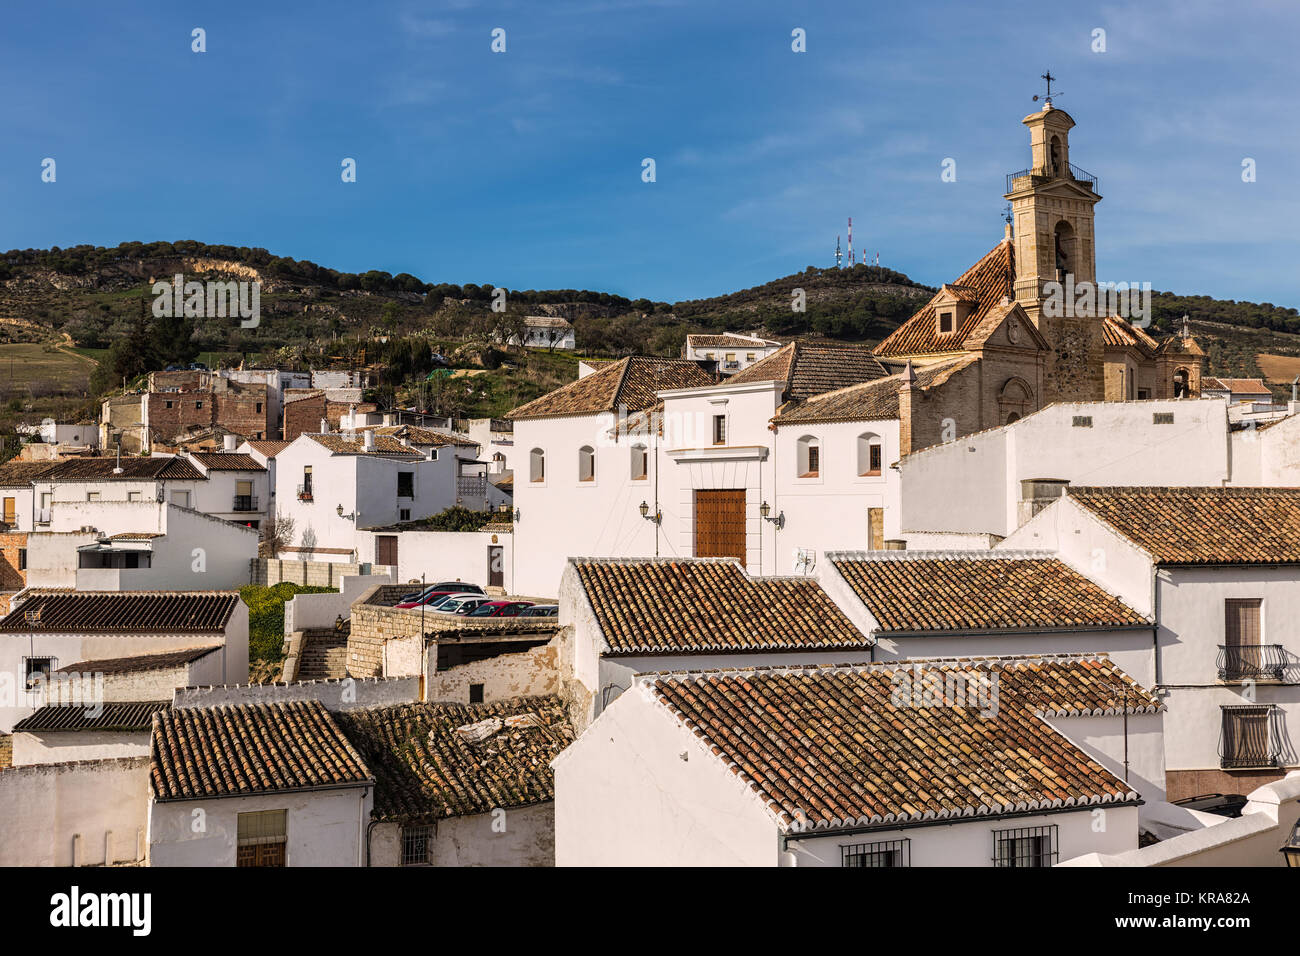 Landscape from the old town Antequera. Spain. Stock Photo